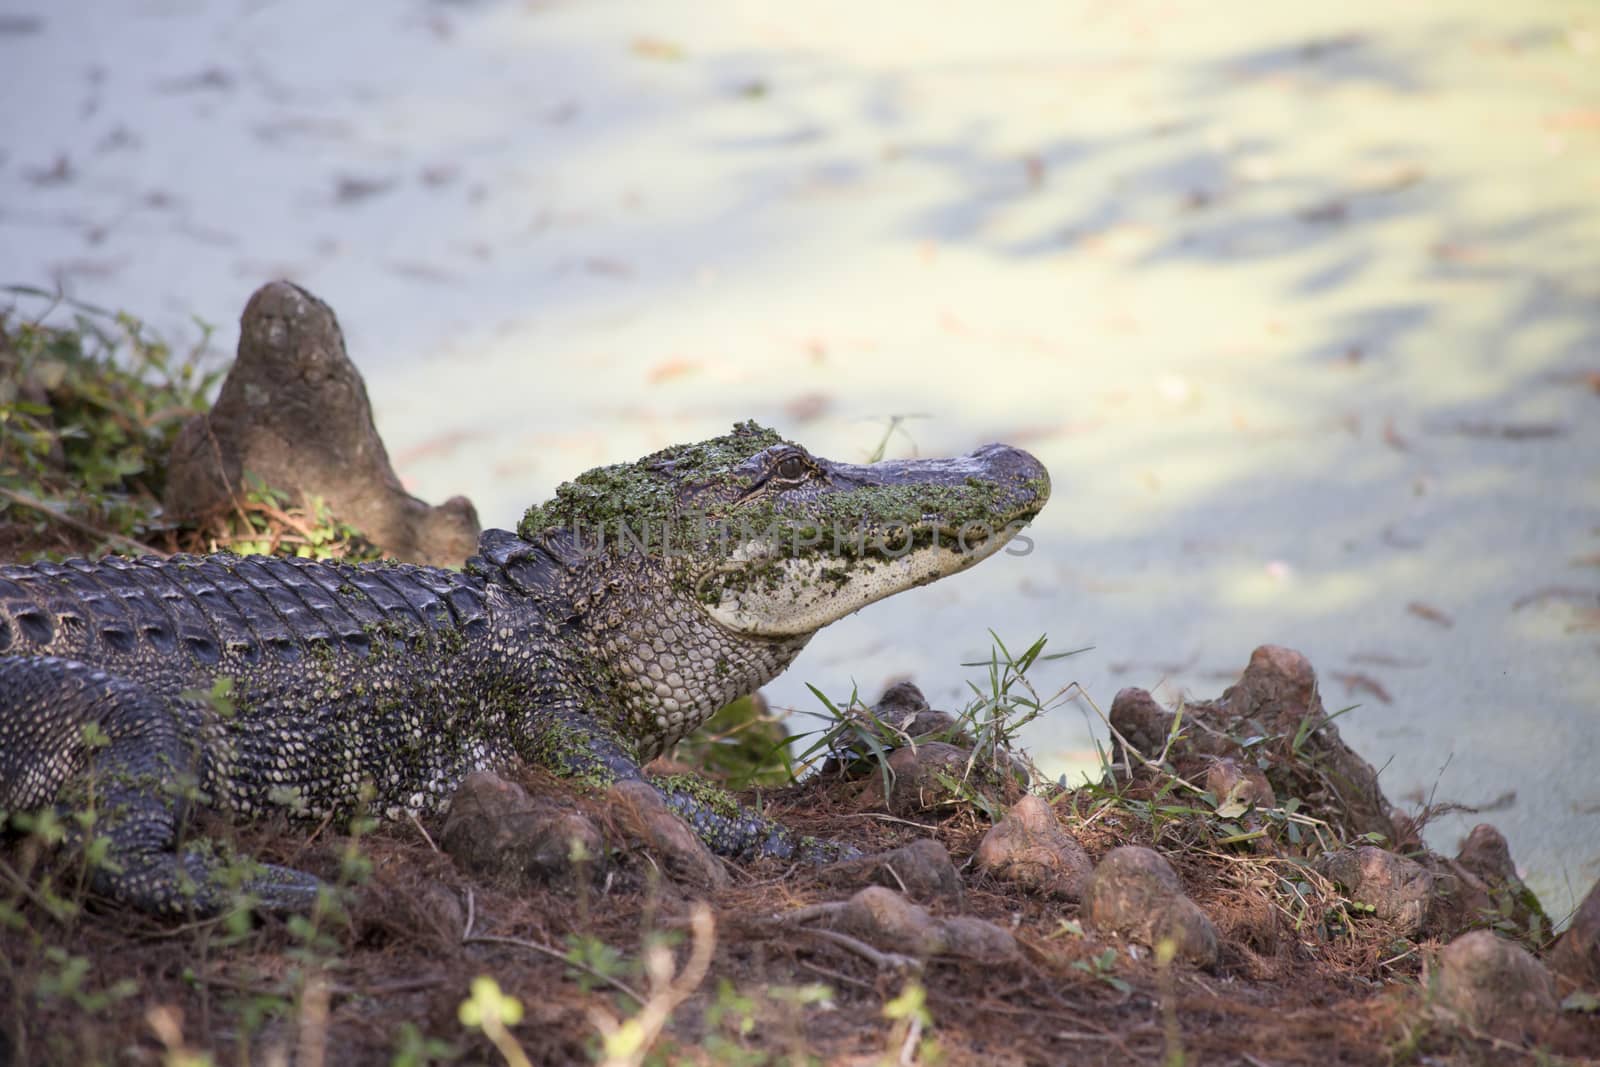 Close up of an alligator (Alligator mississippiensis) resting near a bayou shore